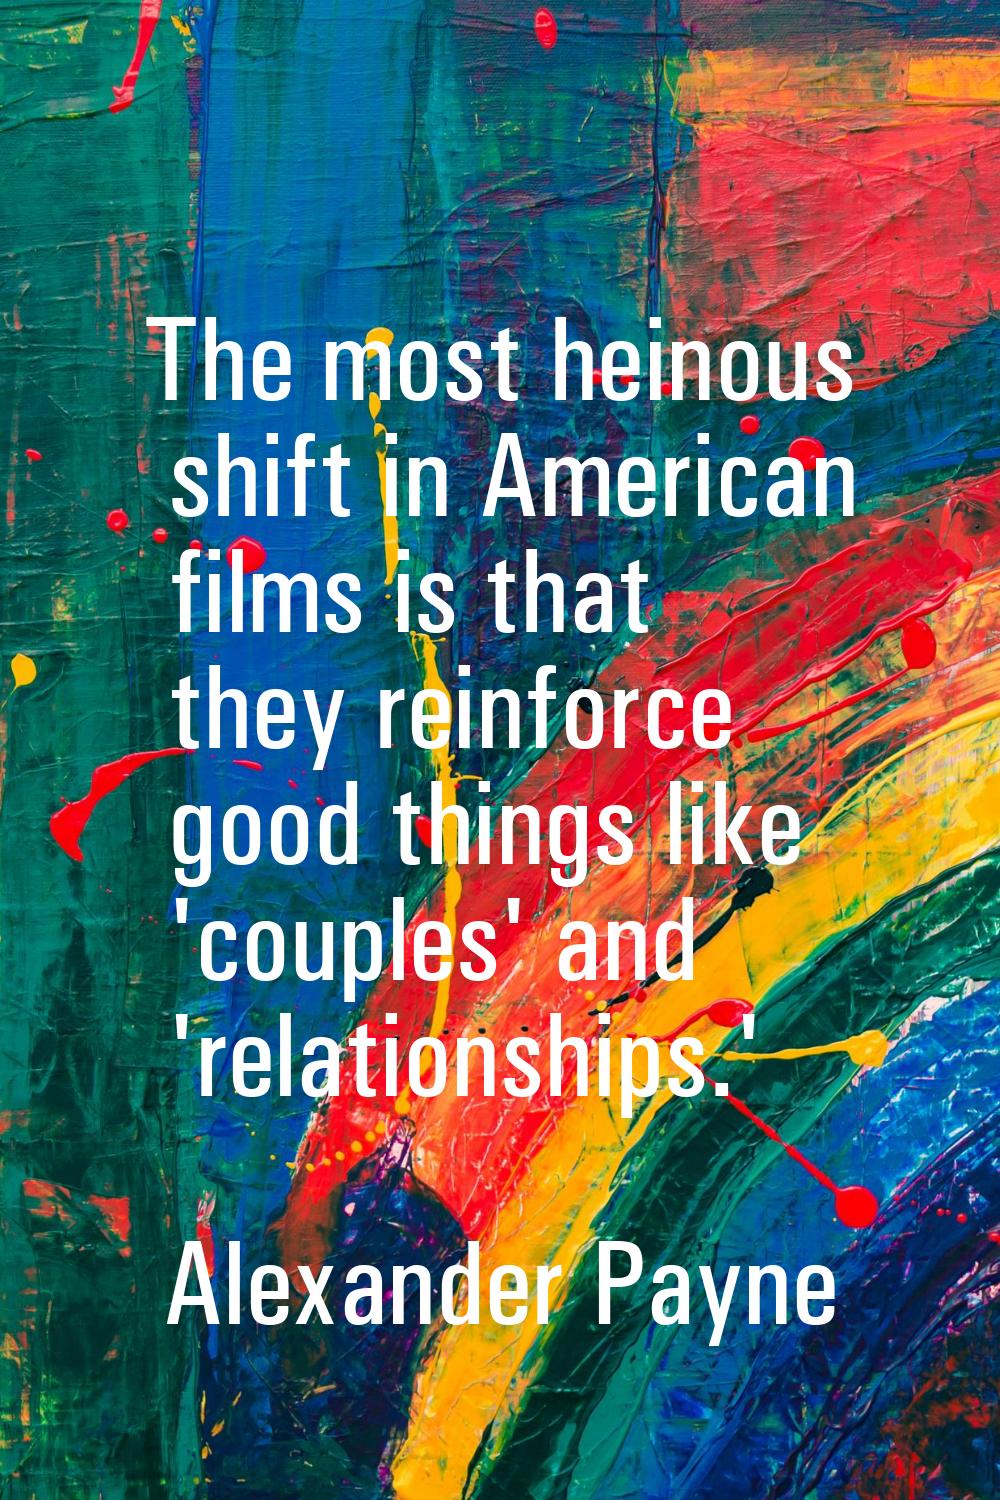 The most heinous shift in American films is that they reinforce good things like 'couples' and 'rel